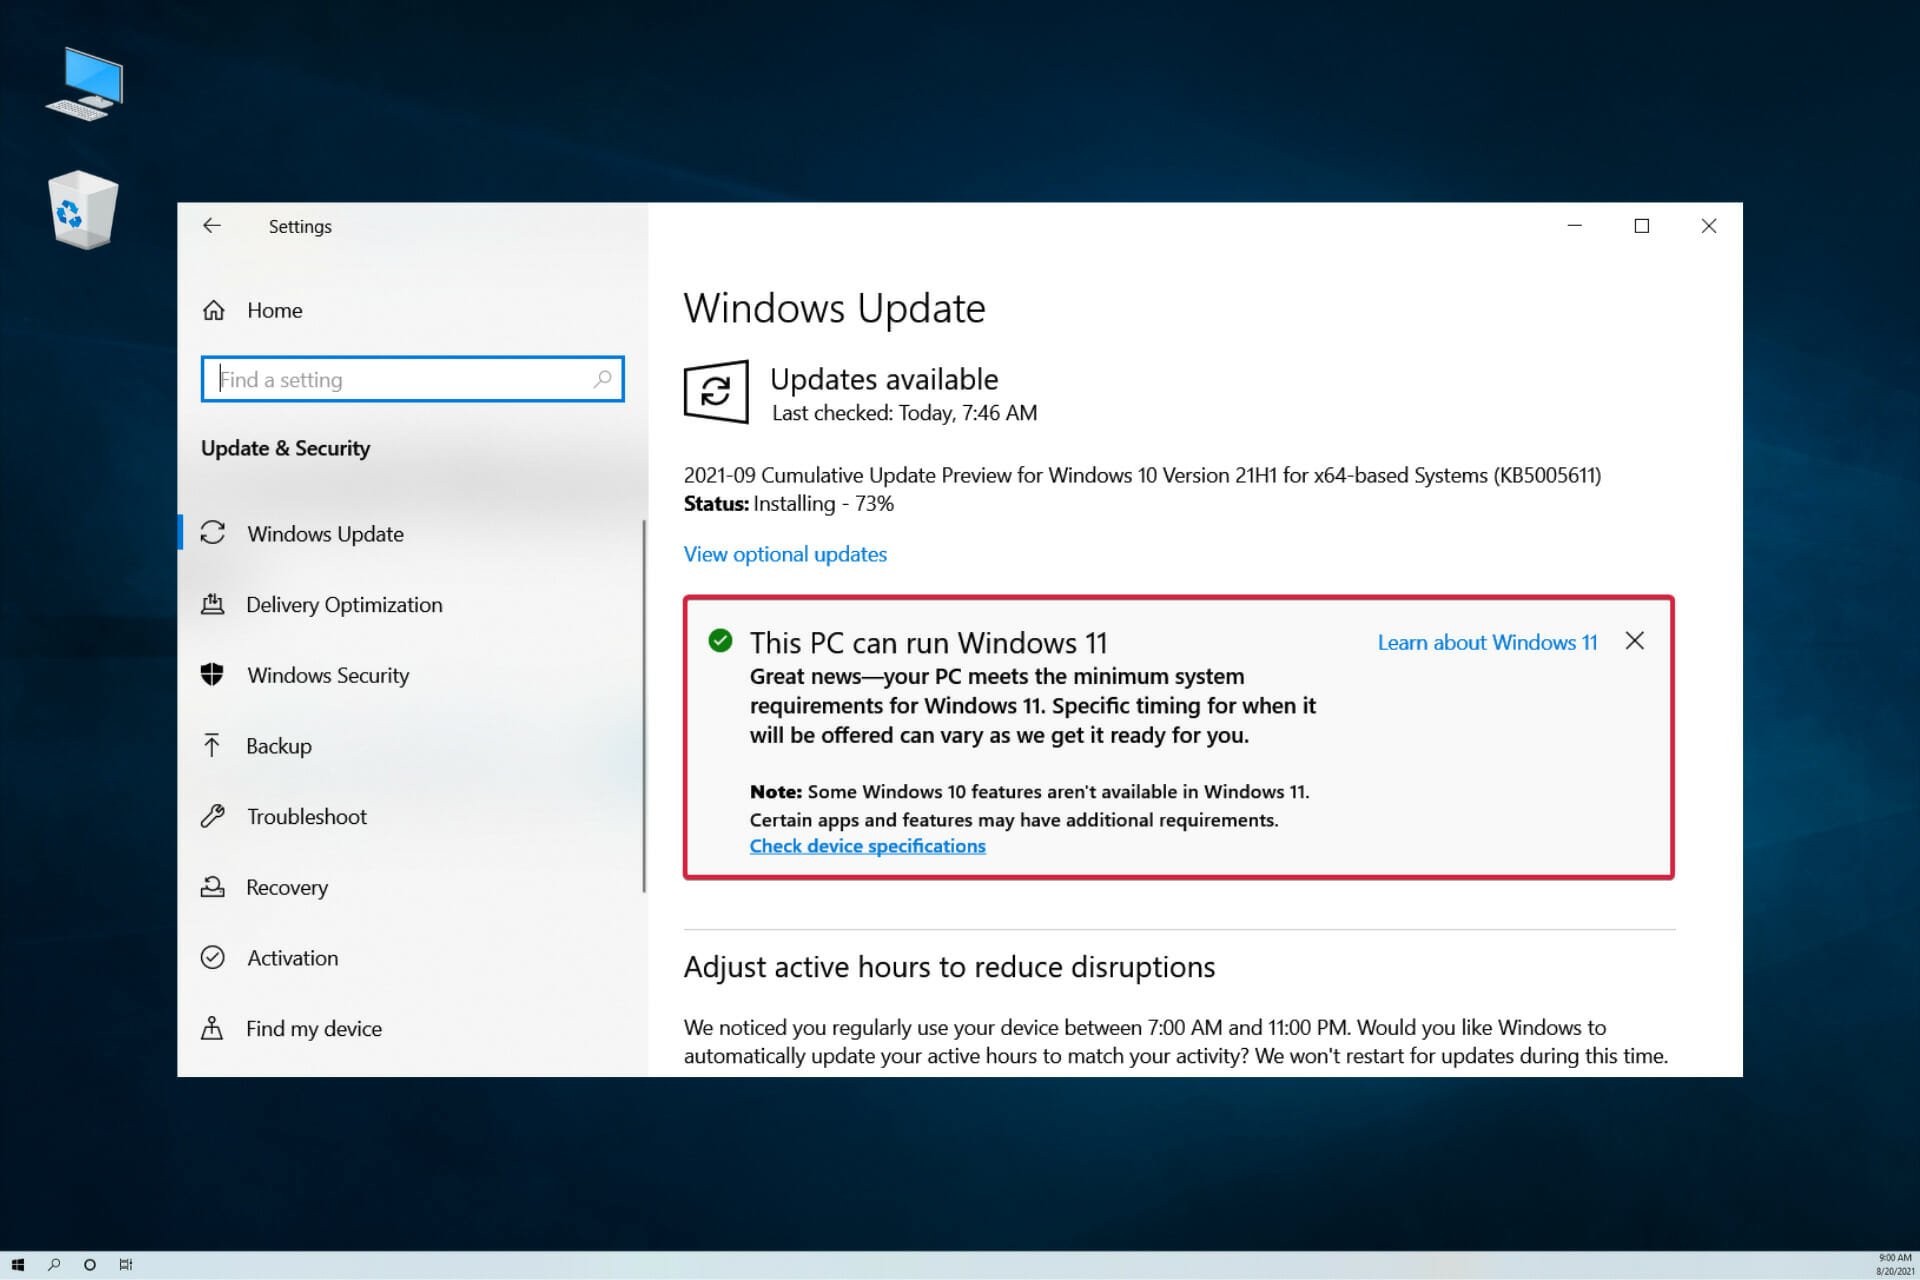 How to install Windows 11 without using the assistant